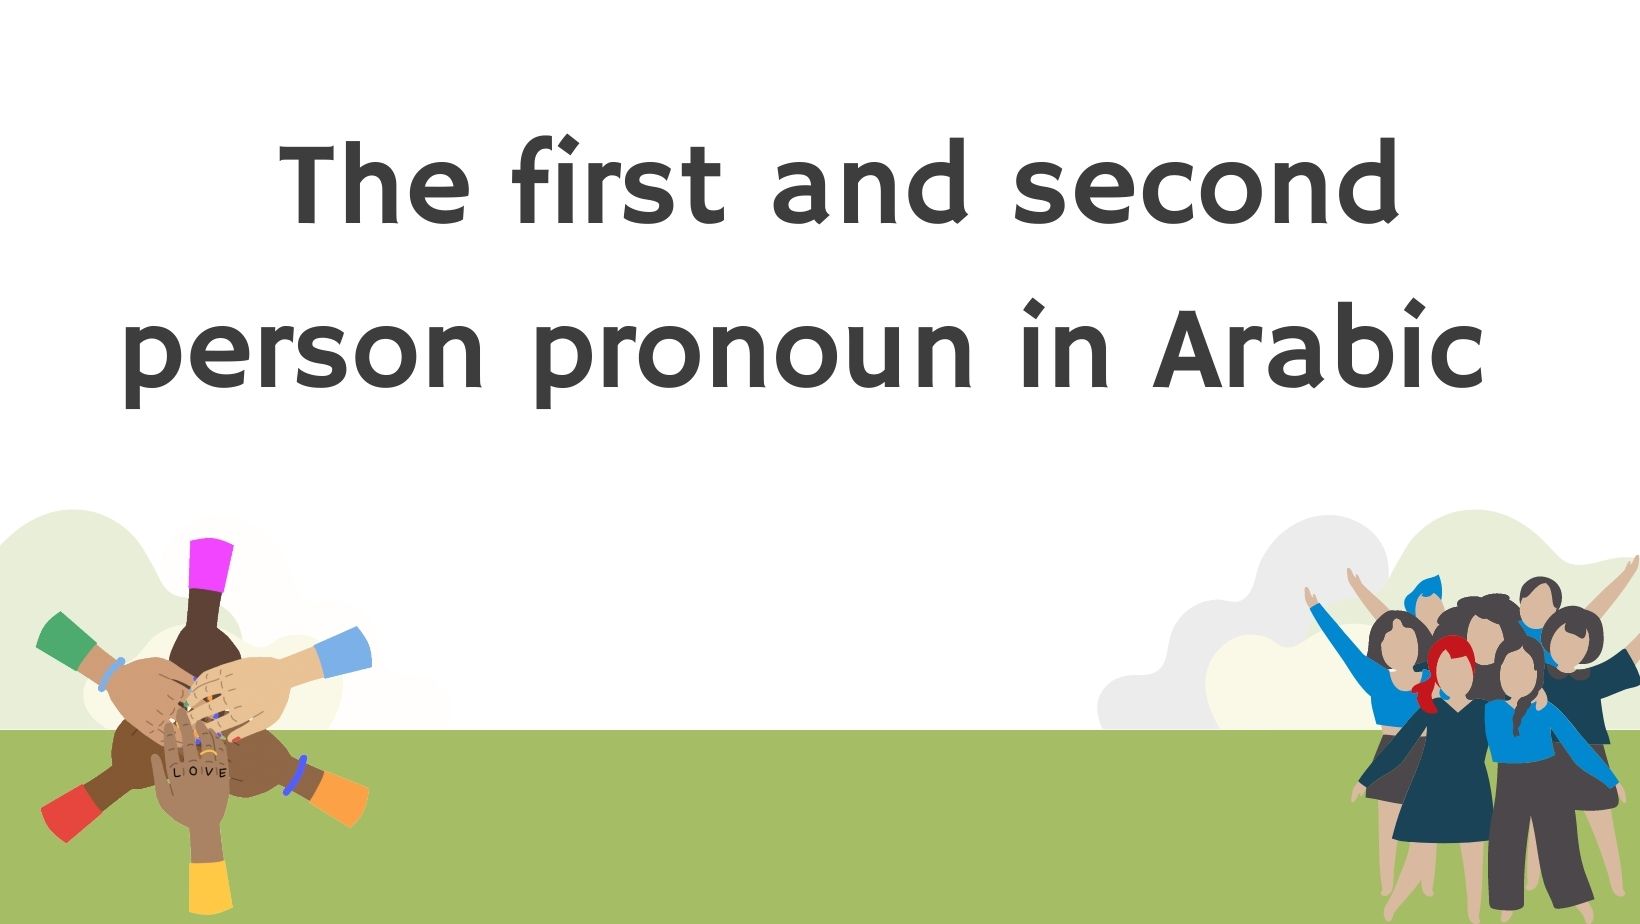 The first and second-person pronoun in Arabic